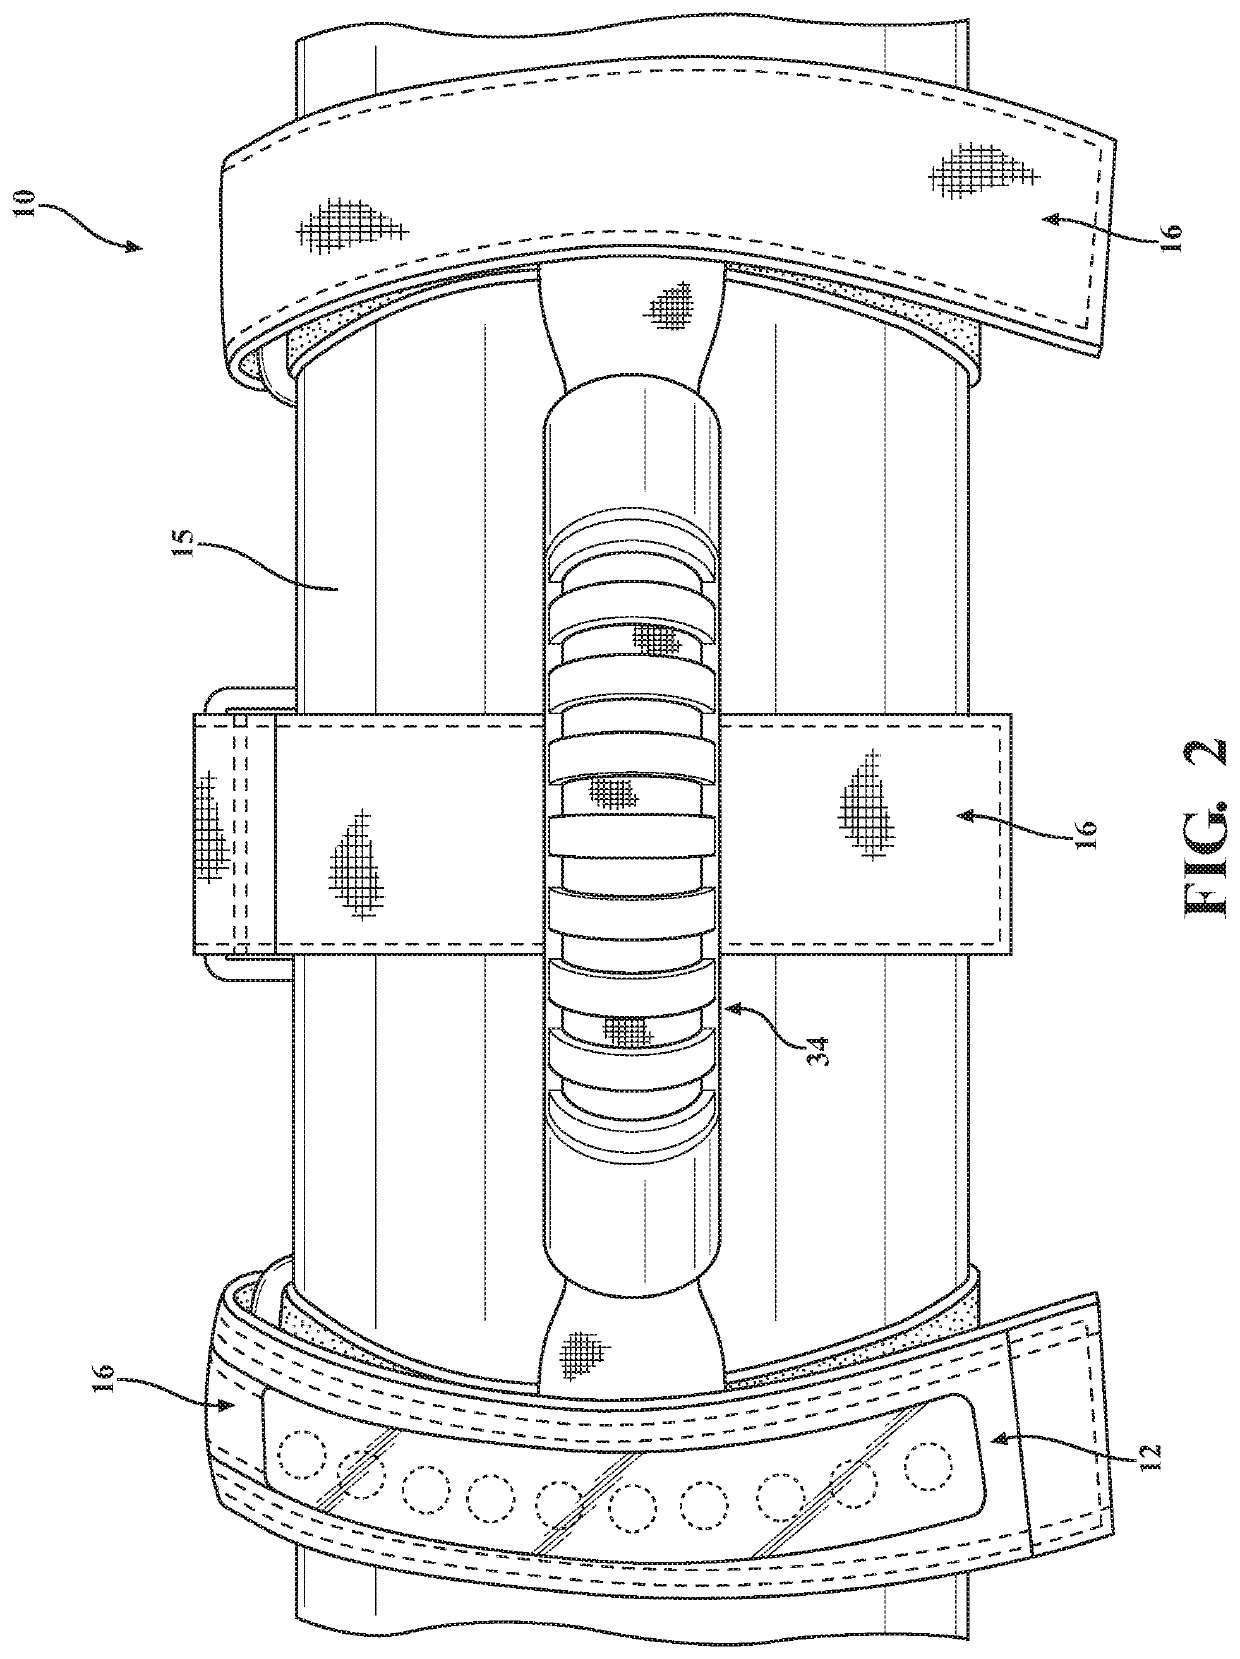 Lighting device for a sport utility vehicle or utility task vehicle